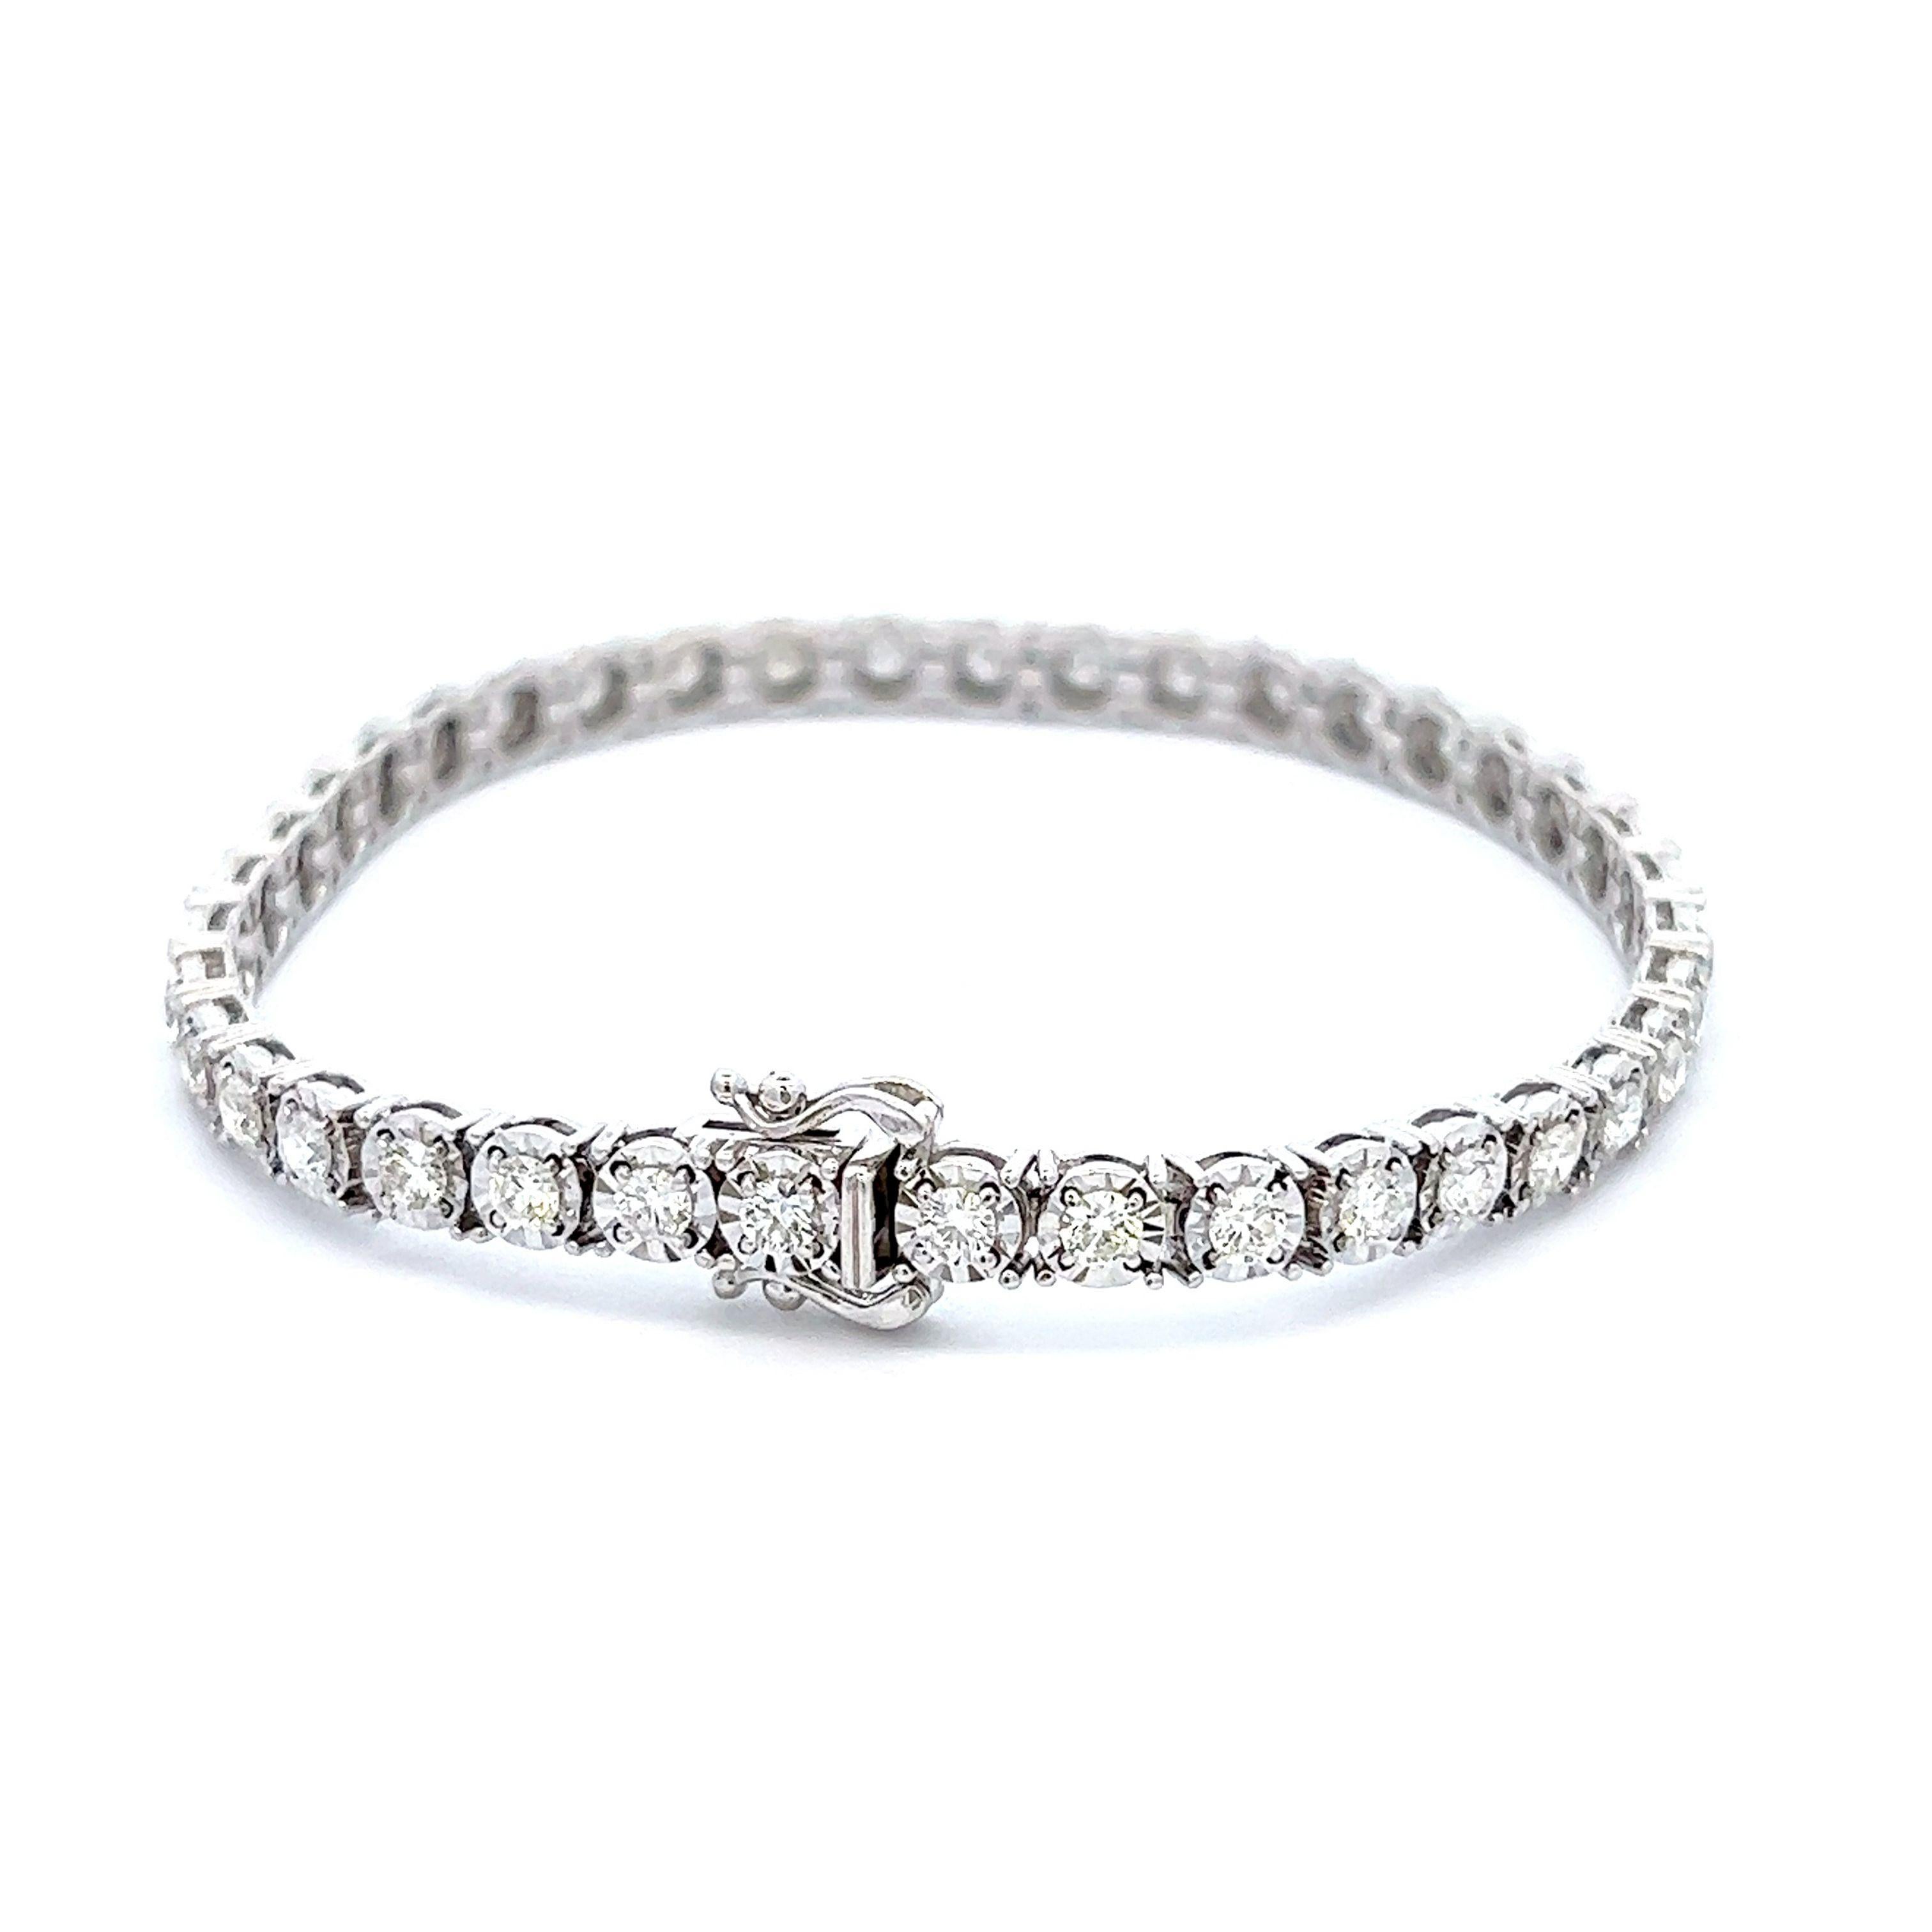 Exquisite and timeless illusion set diamonds tennis bracelet, by Alexander Beverly Hills.
39 round brilliant diamonds, 3.30 carats total. Approximately D-F color and SI clarity. Four prong set in 18k white gold, 13.98 grams, 7 inches. 
Accommodated